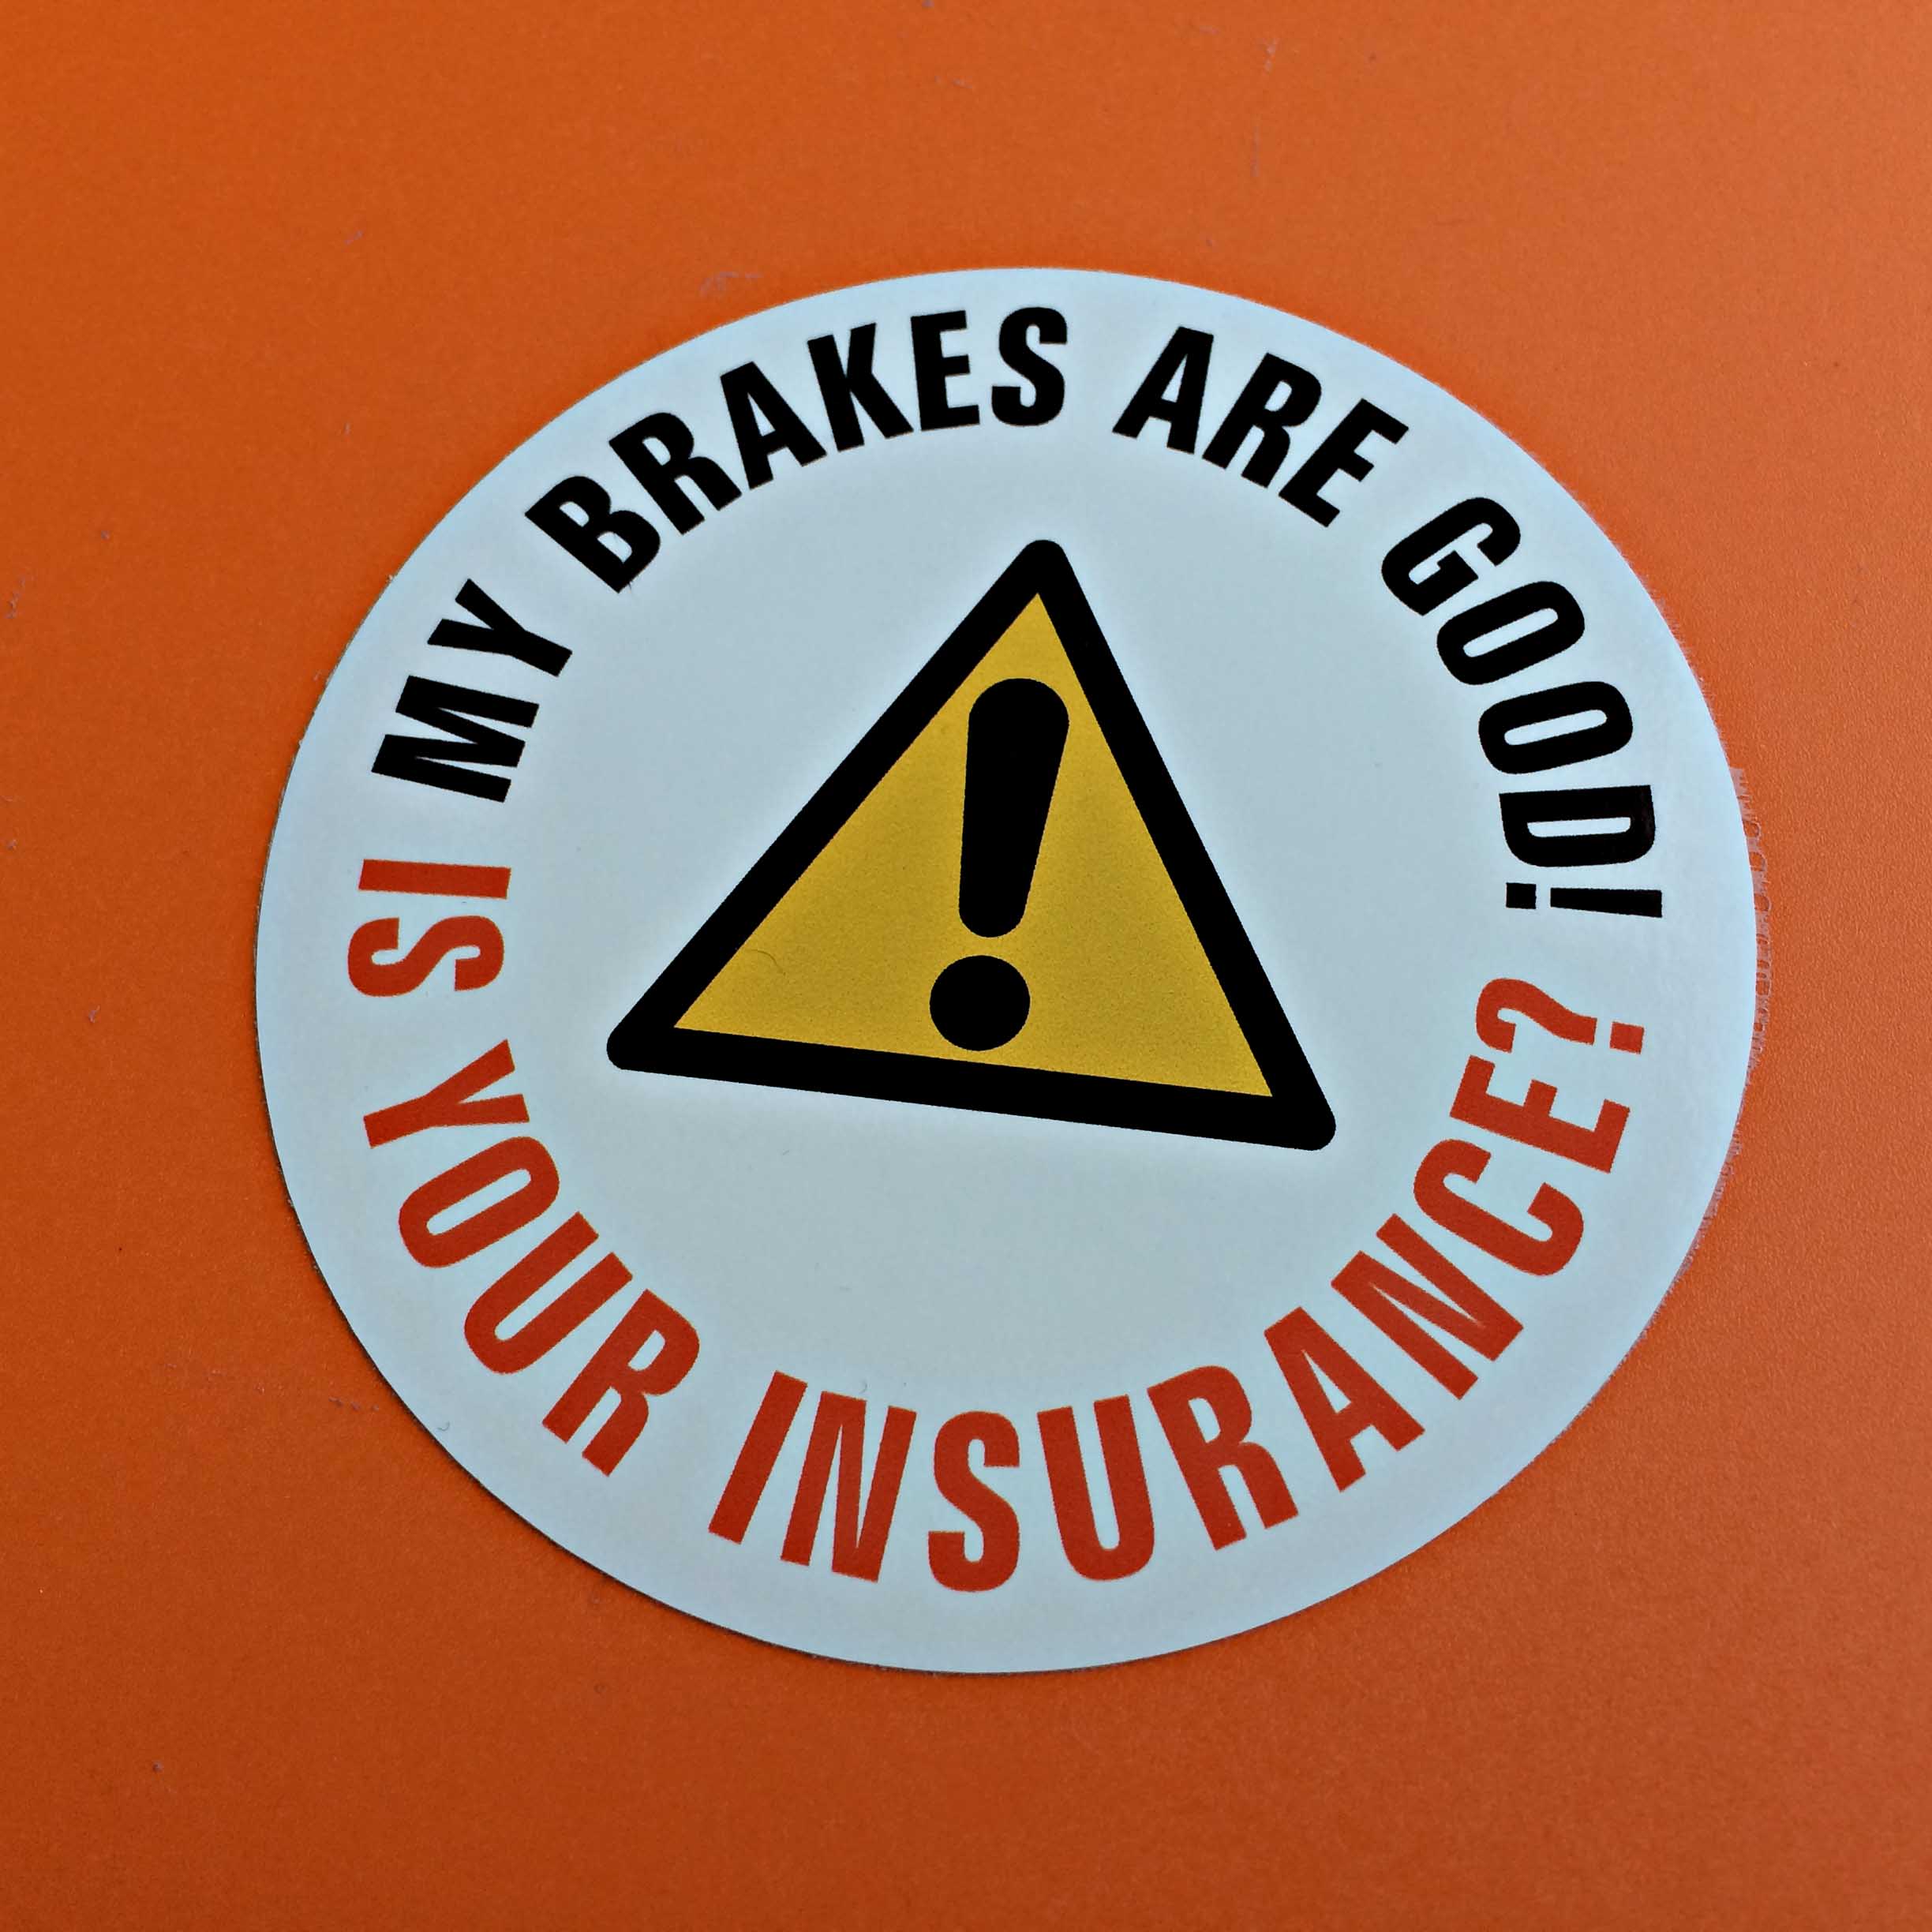 My Brakes Are Good! in black lettering Is Your Insurance? in red lettering. Centre of the circle is a yellow hazard warning triangle.